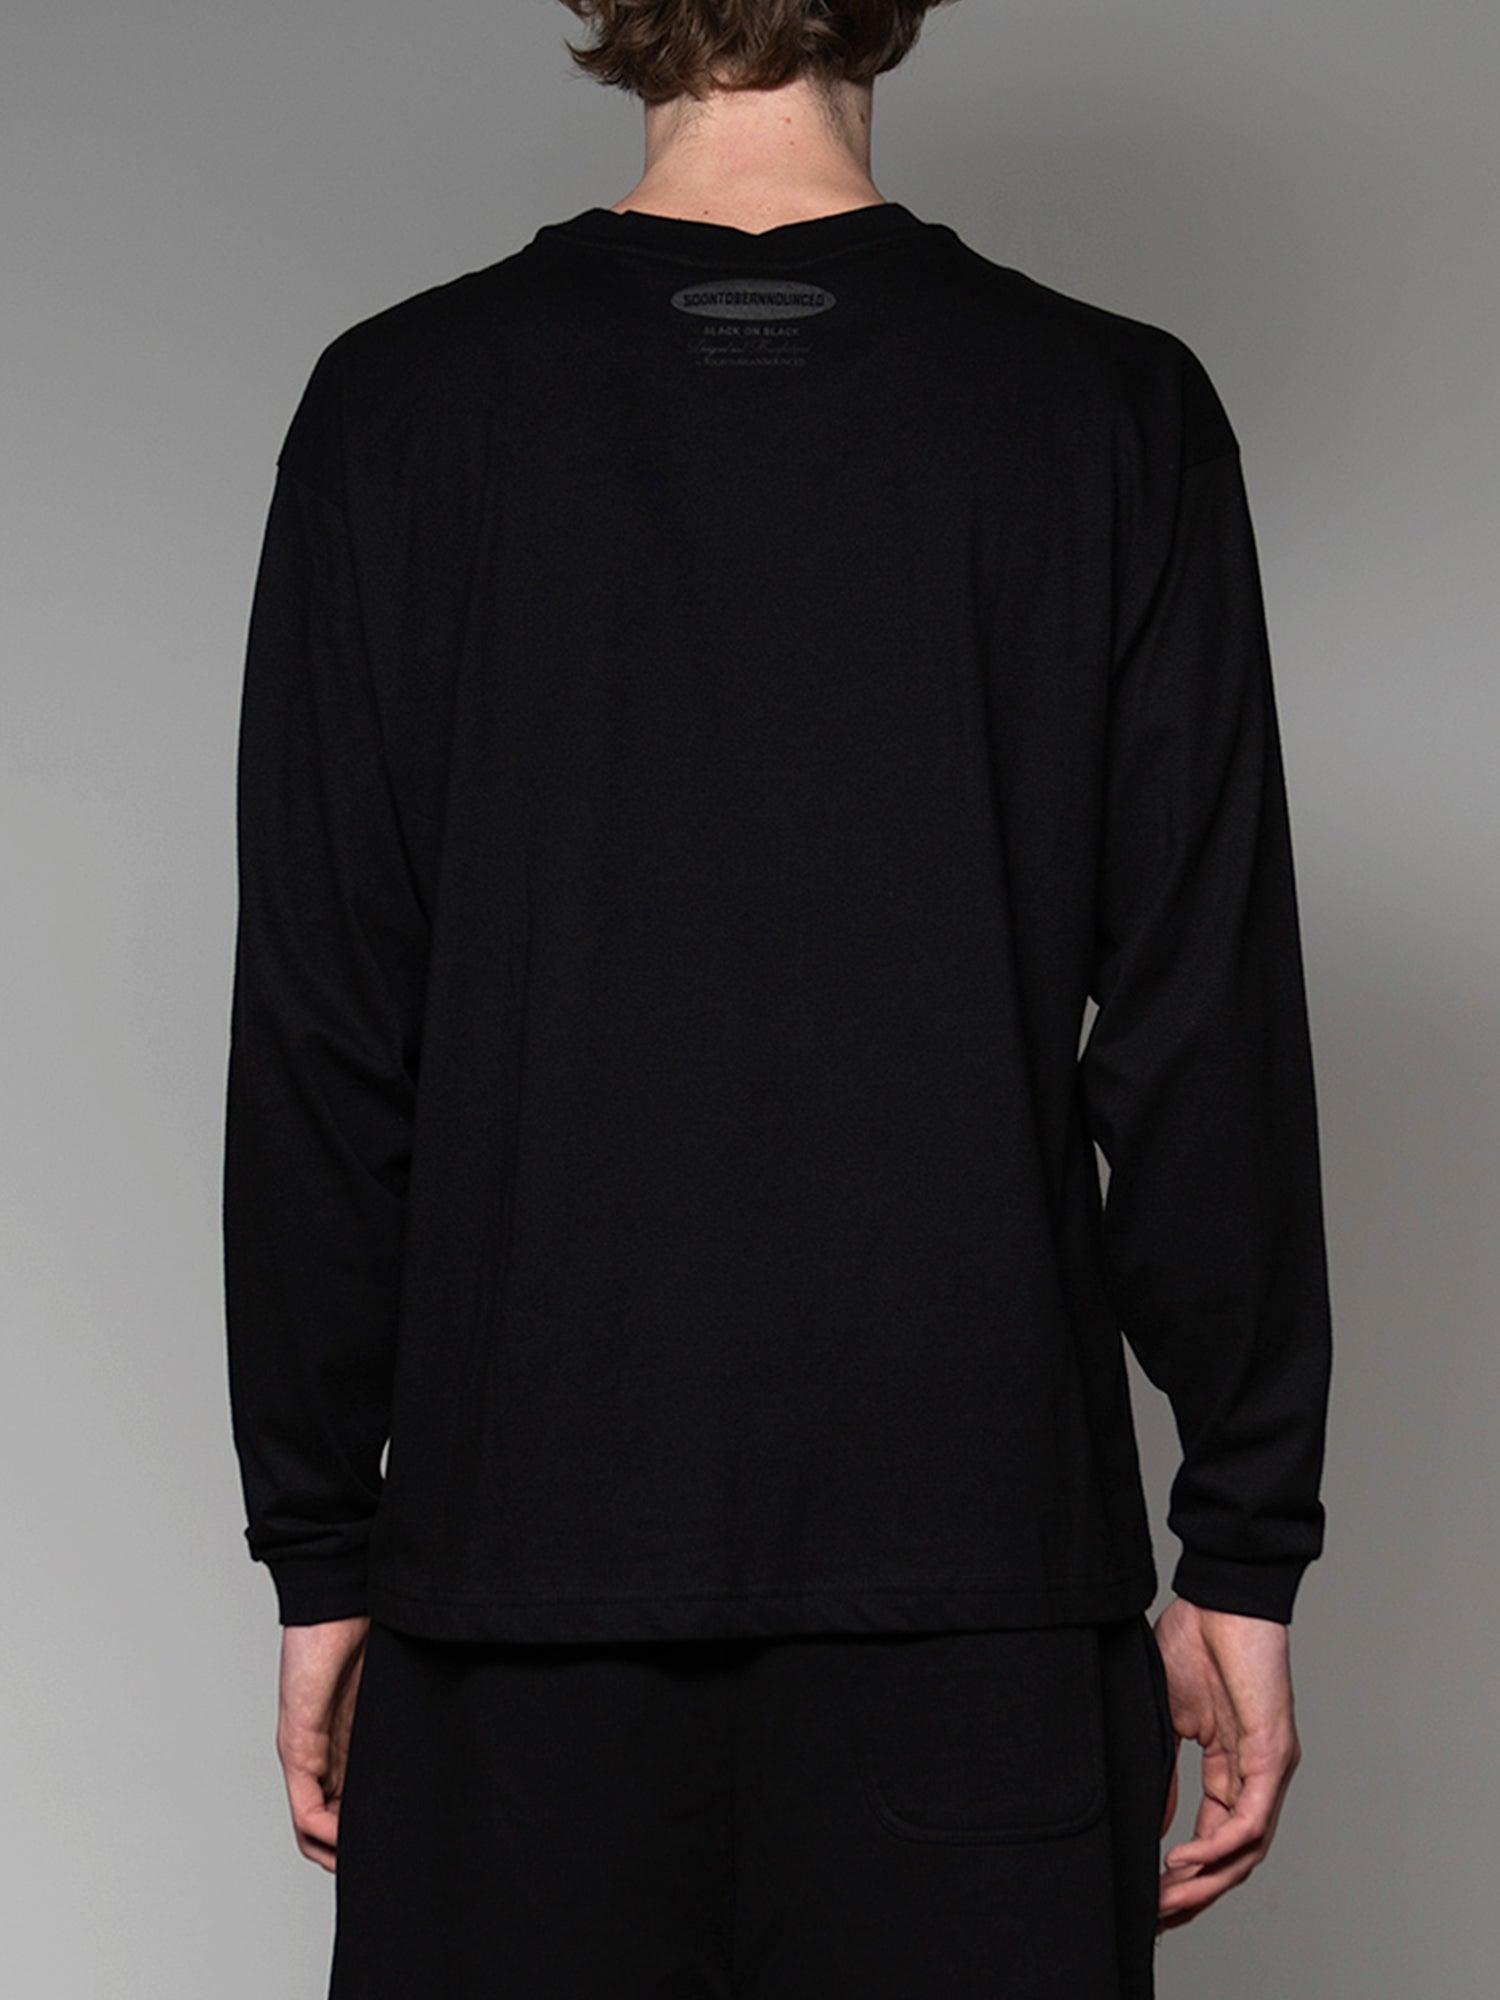 Black on Black L/S T-Shirt - SOON TO BE ANNOUNCED